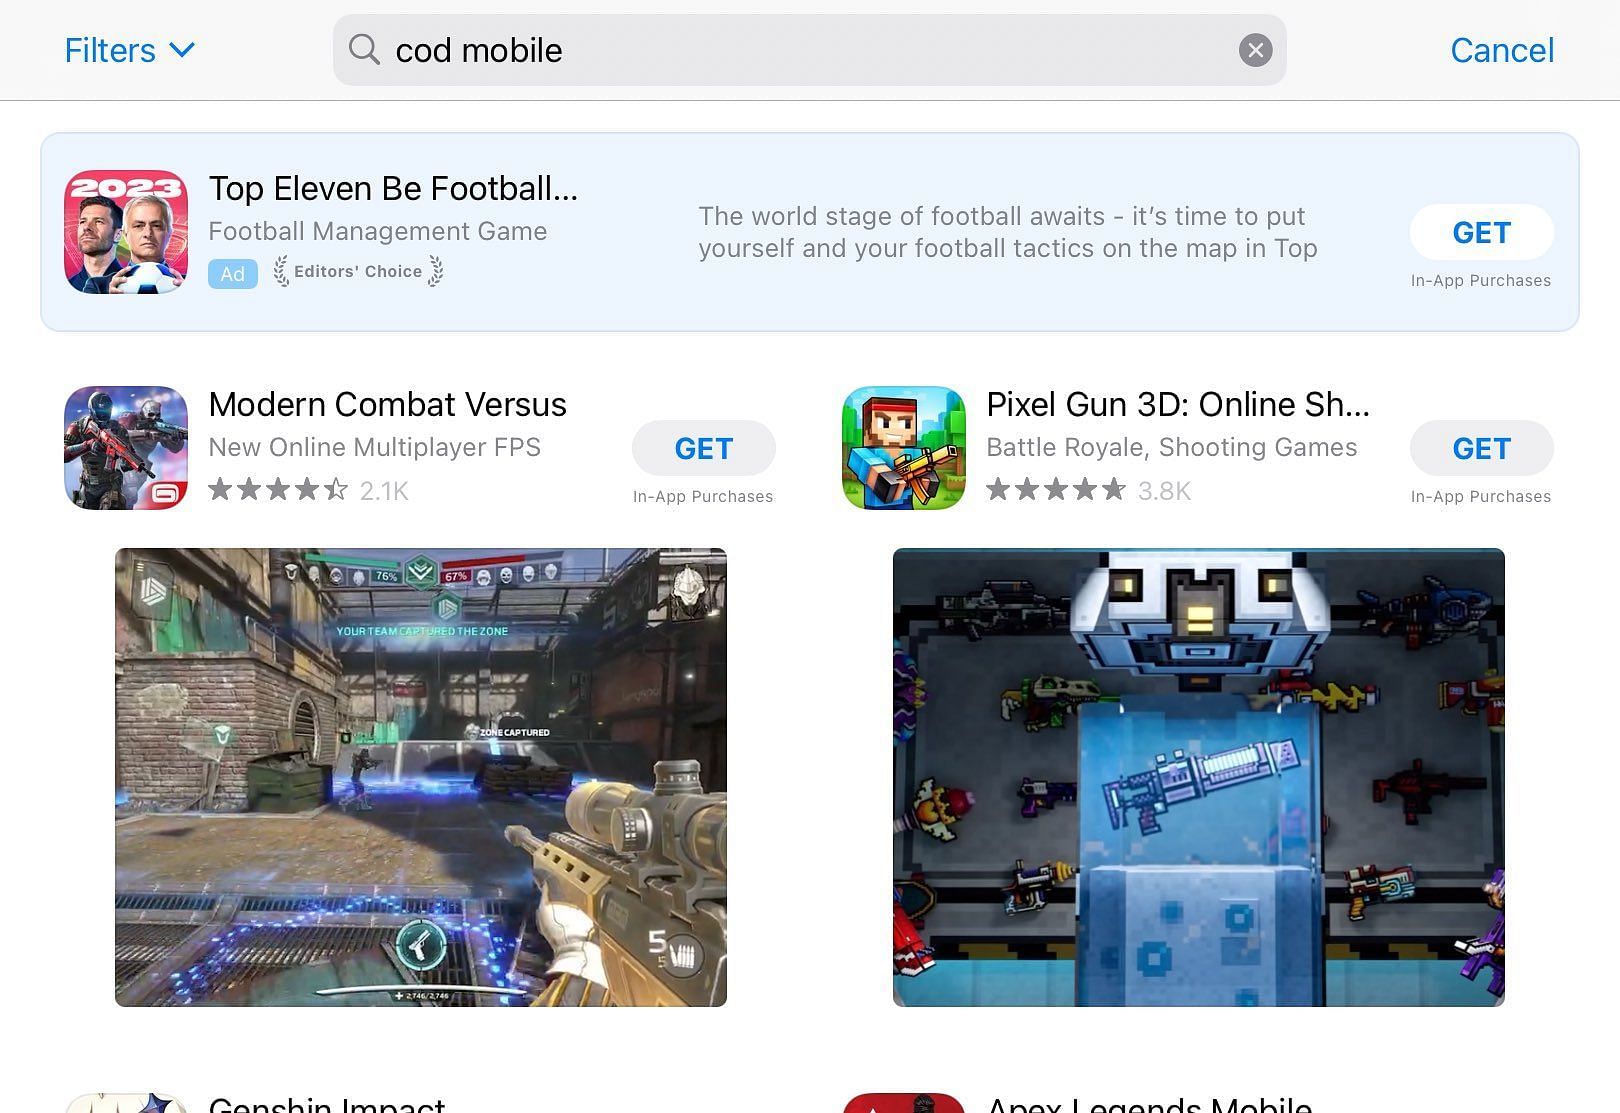 Call of Duty: Mobile has been removed from the Apple App Store; Google Play  Store continues to support the game